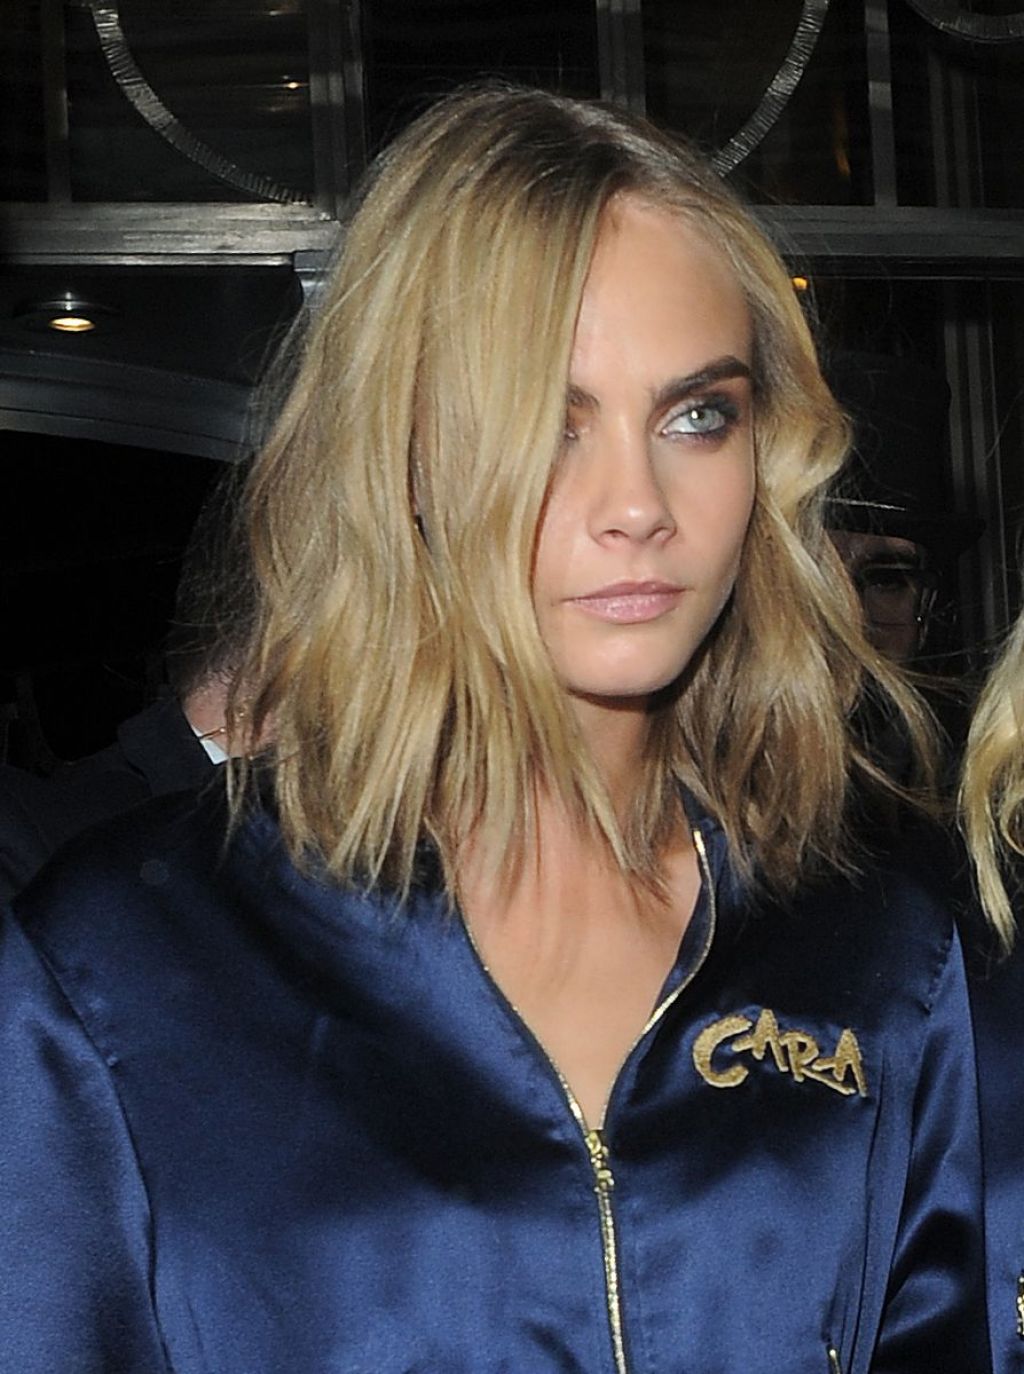 Cara Delevingne & Margot Robbie - Out Partying in Matching Tracksuits 08/04/20161024 x 1374